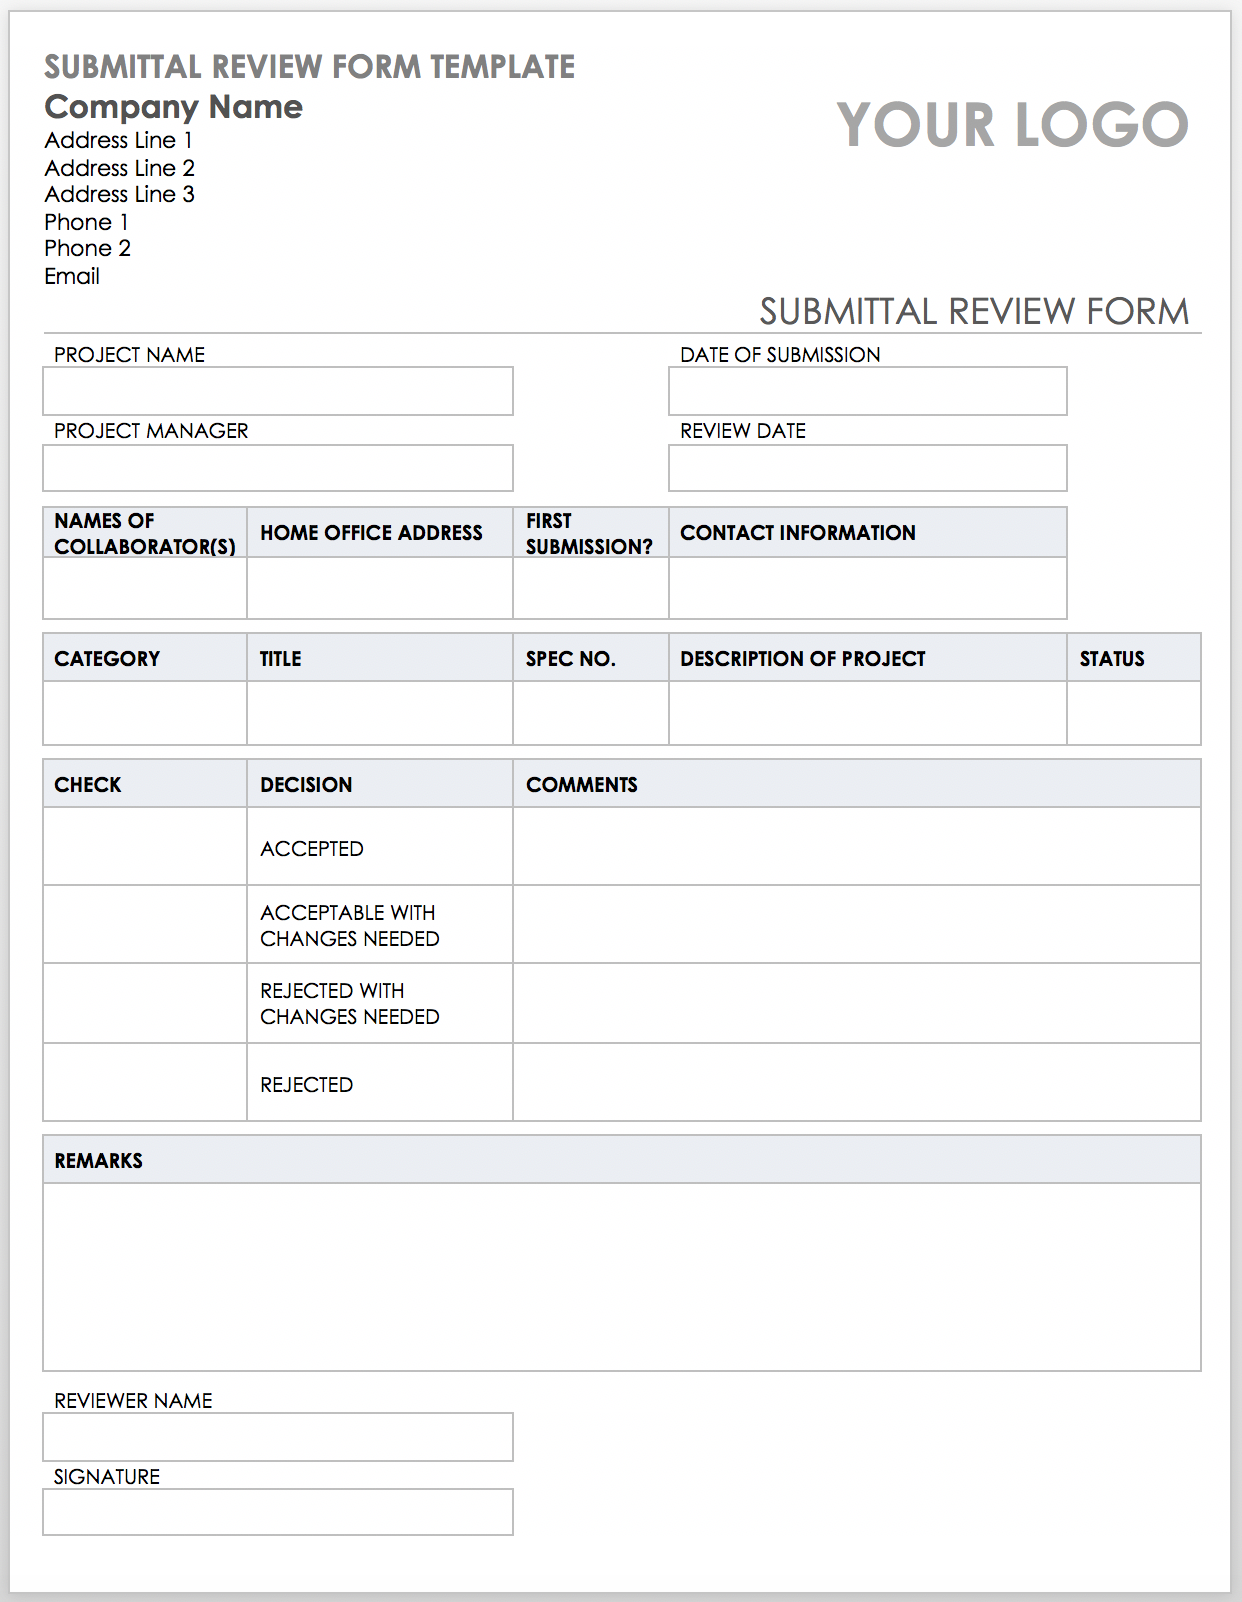 free-construction-submittal-form-template-printable-templates